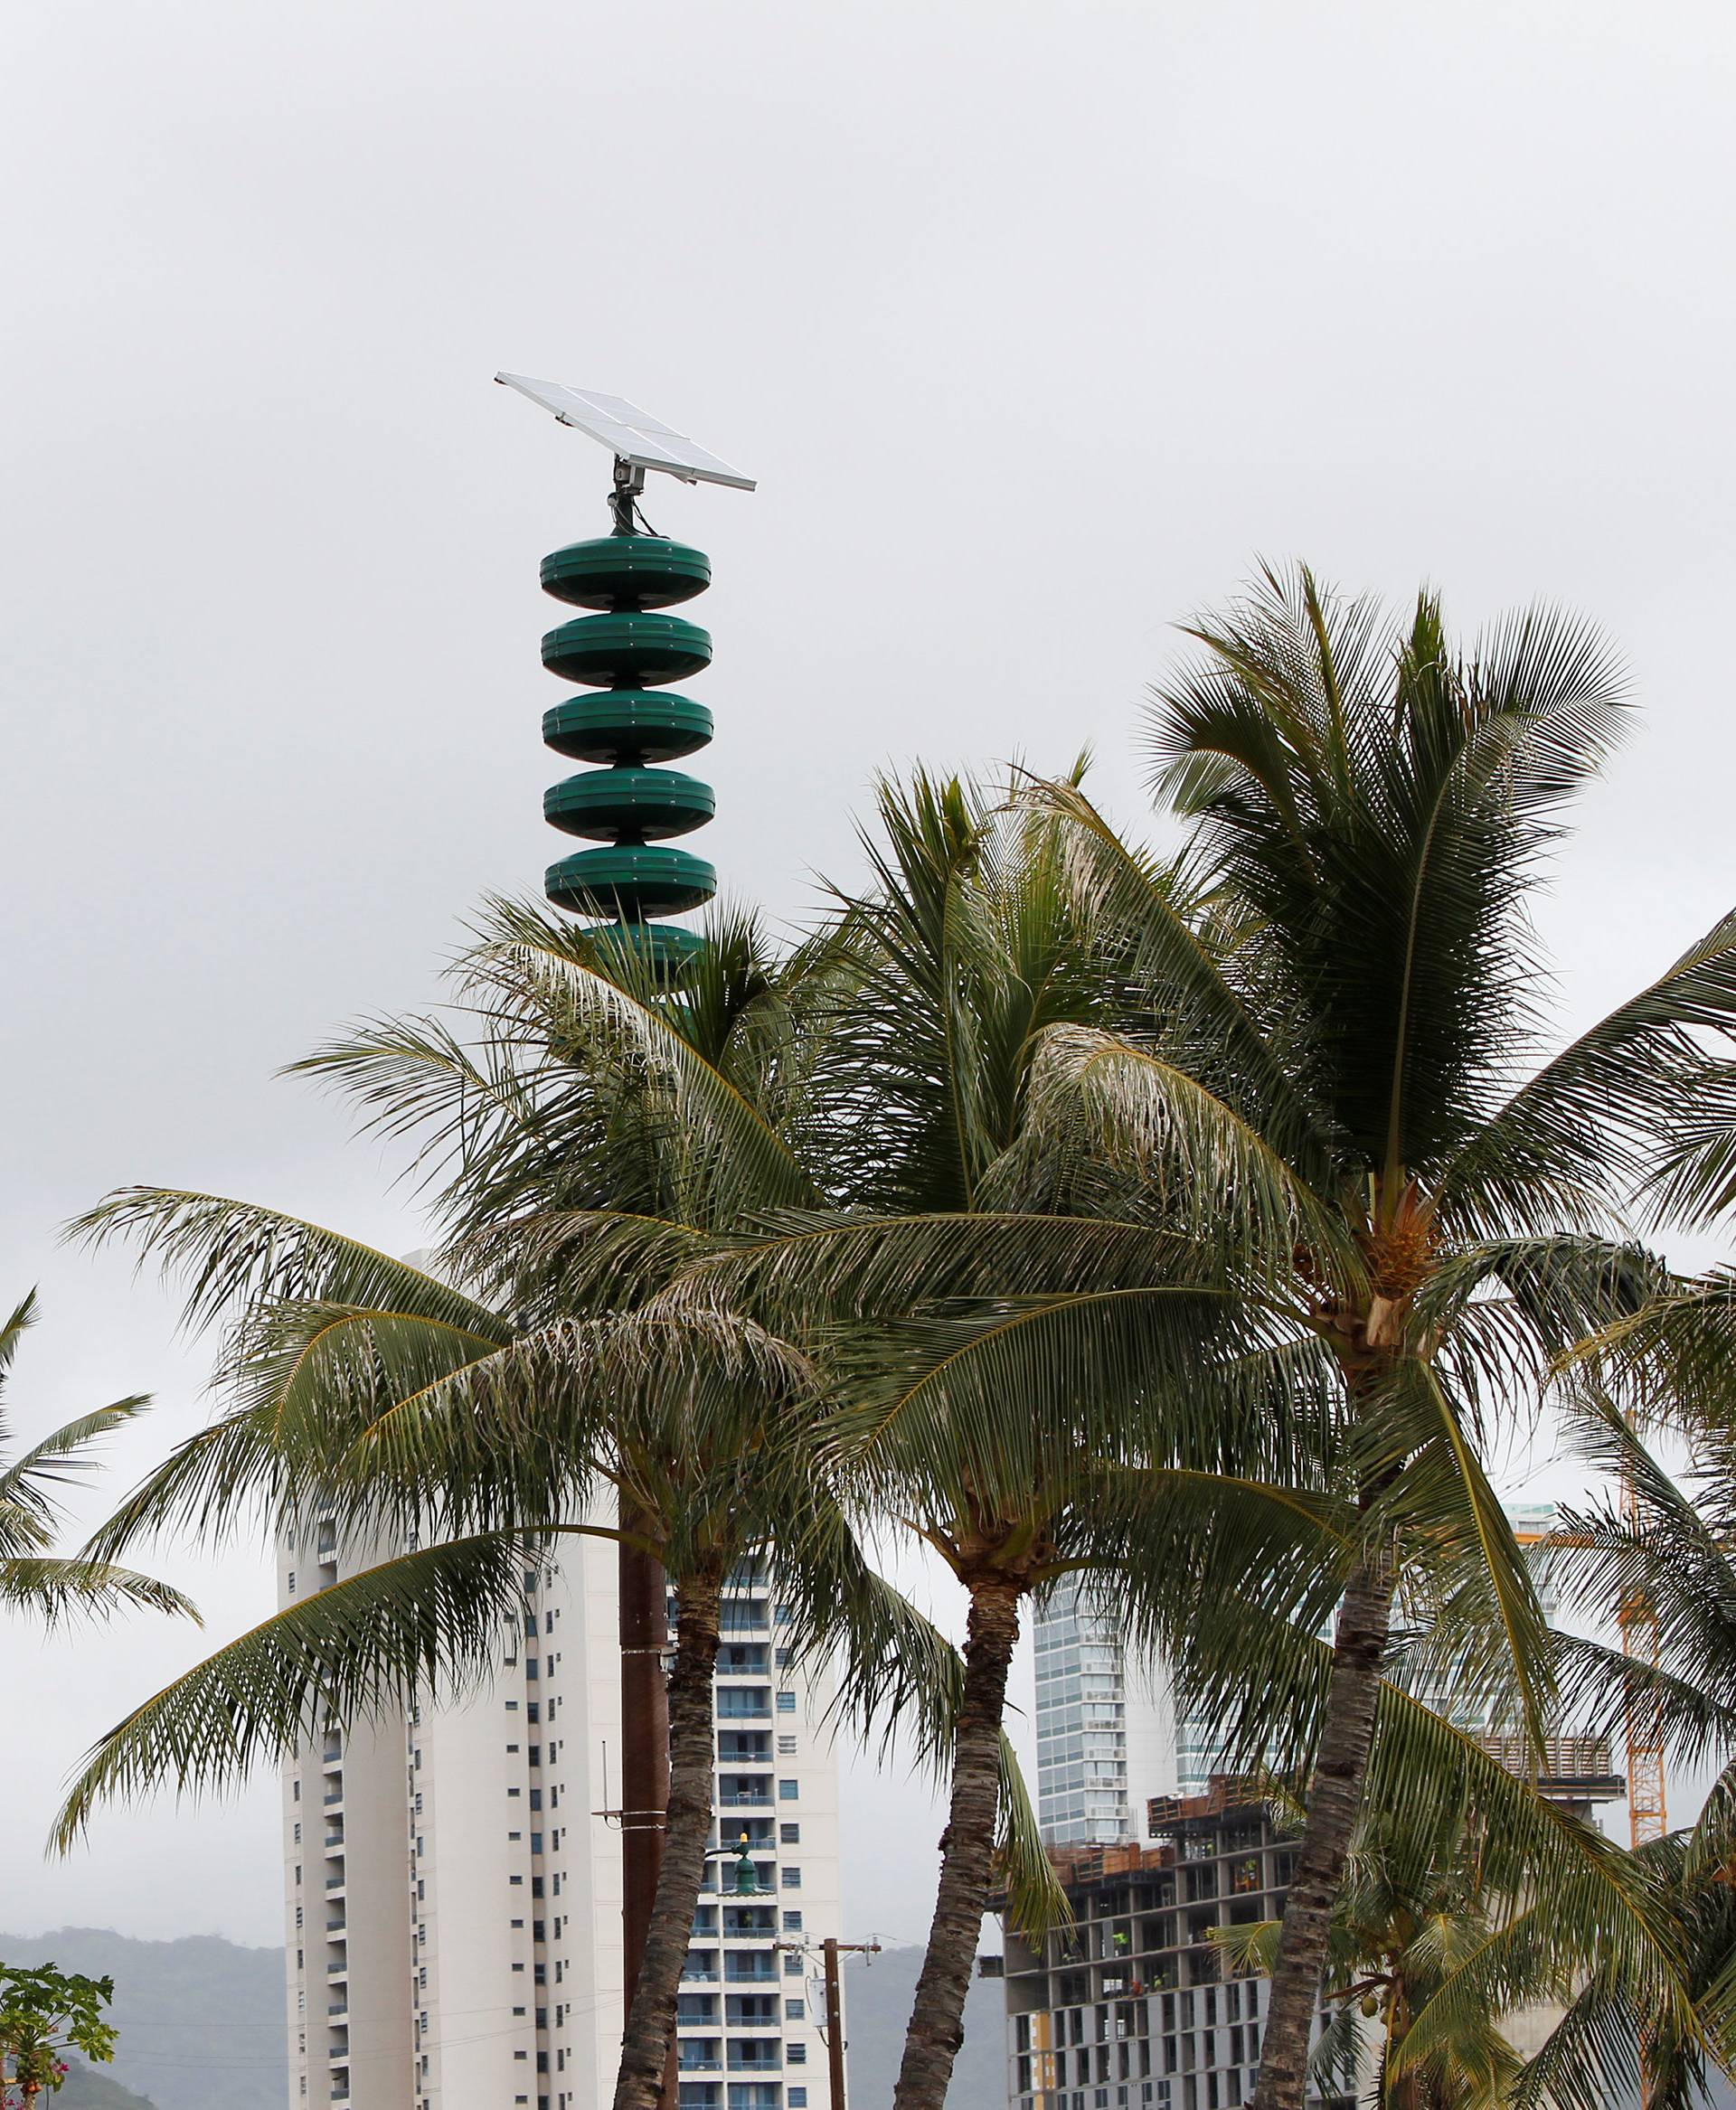 A tsunami warning tower is seen nestled in between palm trees at Kakaako Waterfront Park in Honolulu